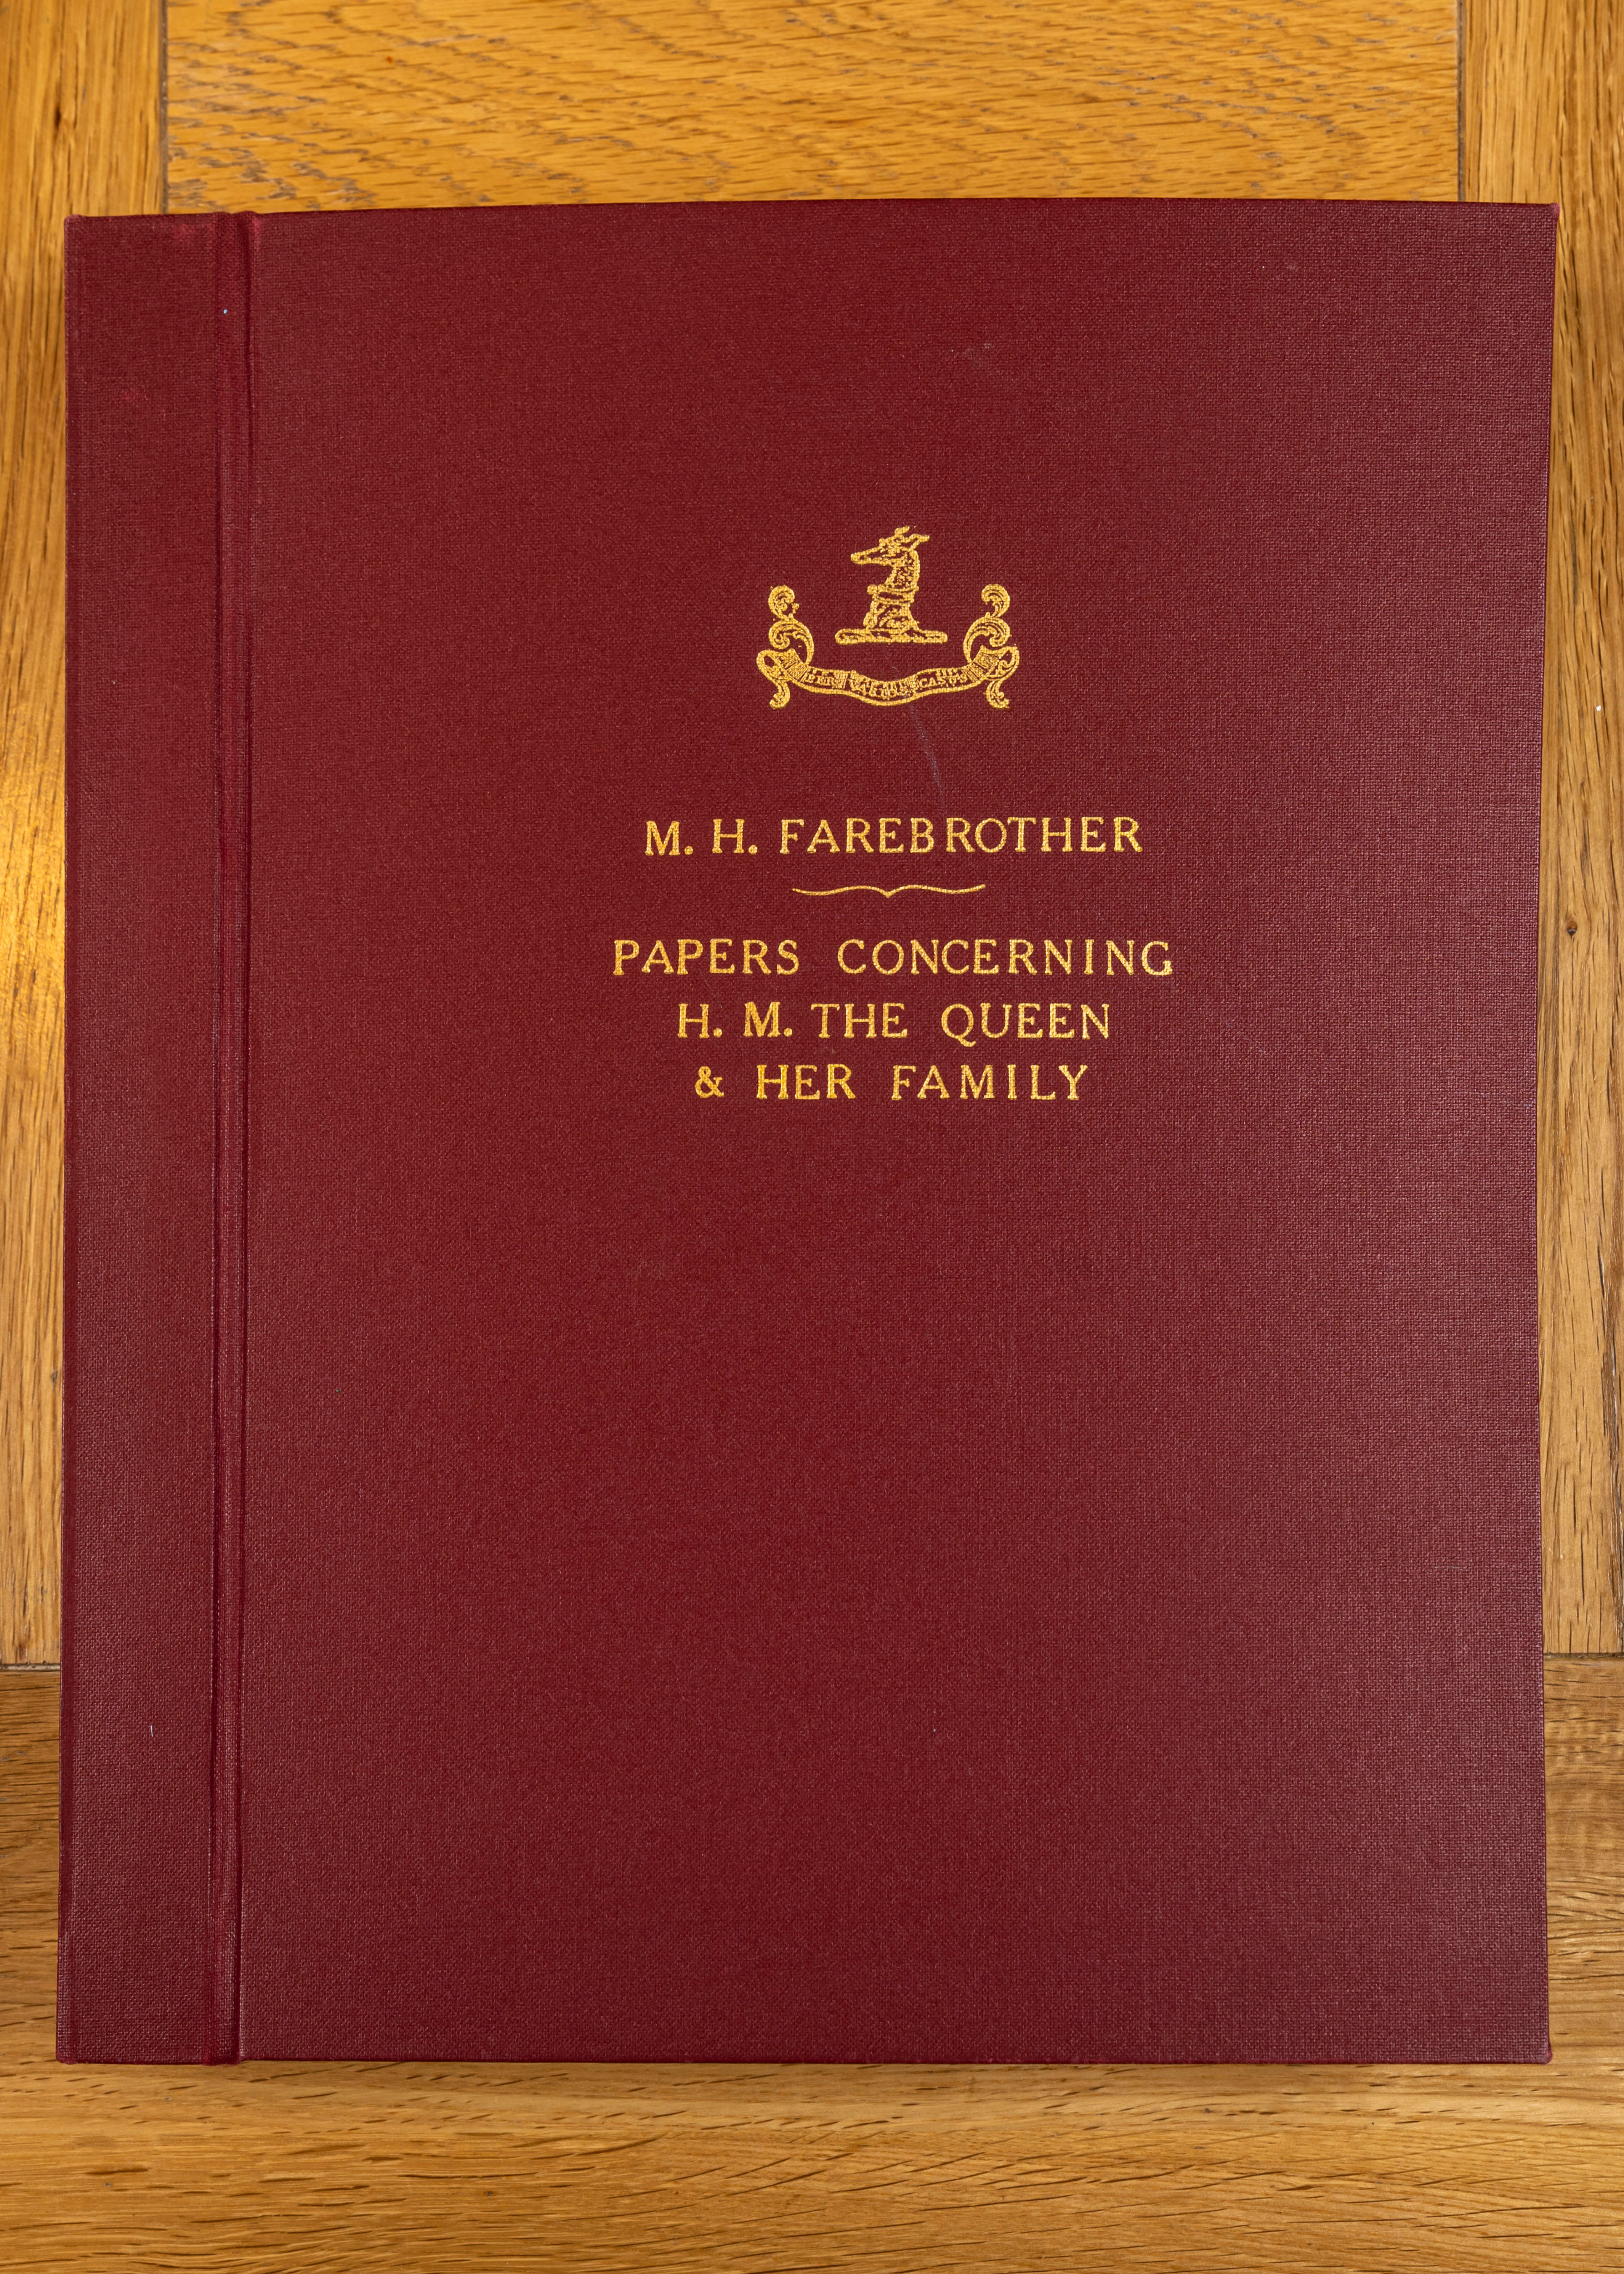 The Michael Farebrother collection of – ‘’Papers Concerning H.M The Queen & Her Family’’, offered for sale for the first time, by a direct descendant of Mr. Farebrother., A unique and historically significant album of ca